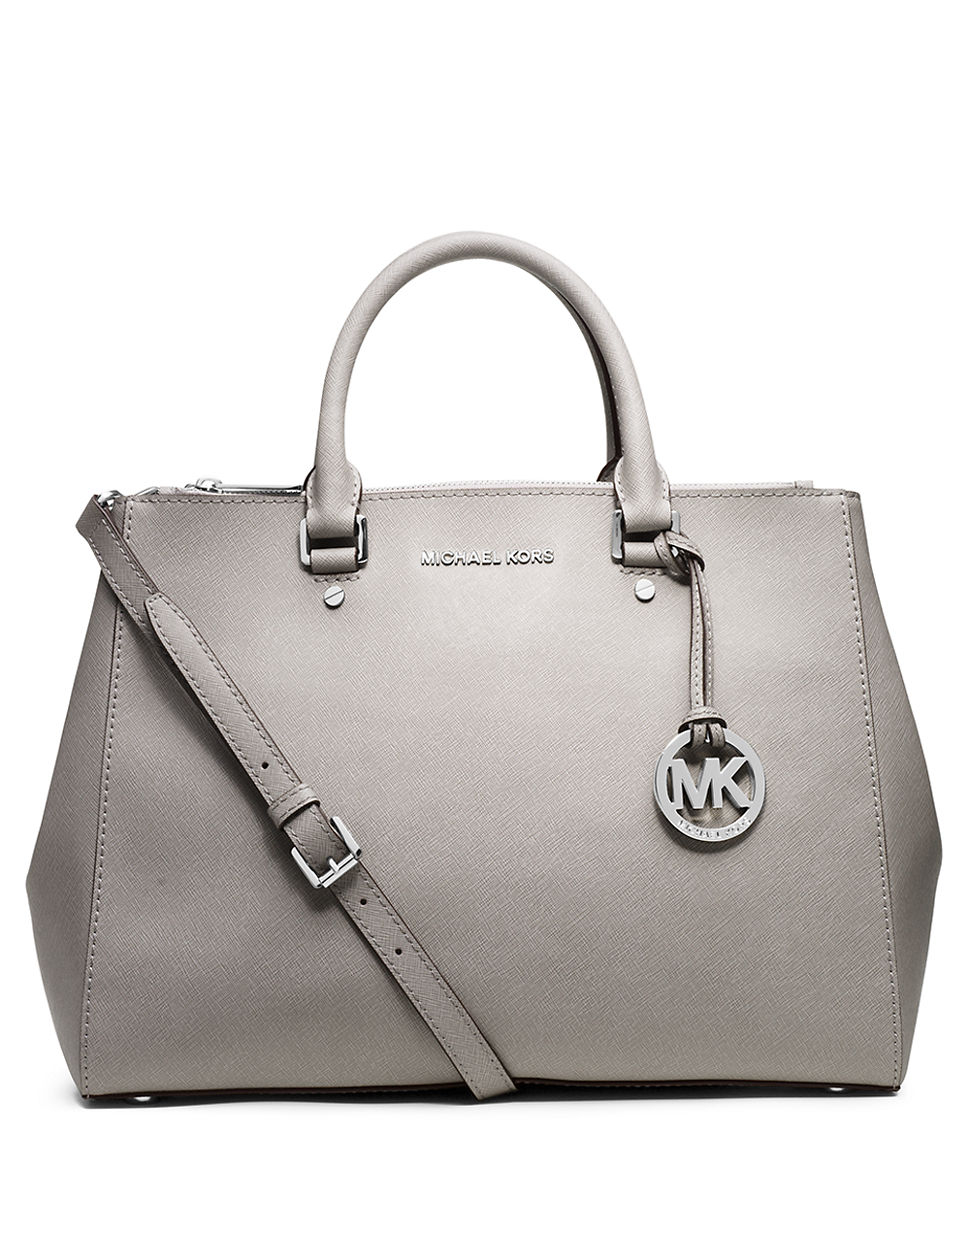 Lyst - Michael Michael Kors Jet Set Leather Large Dressy Tote Bag in Gray